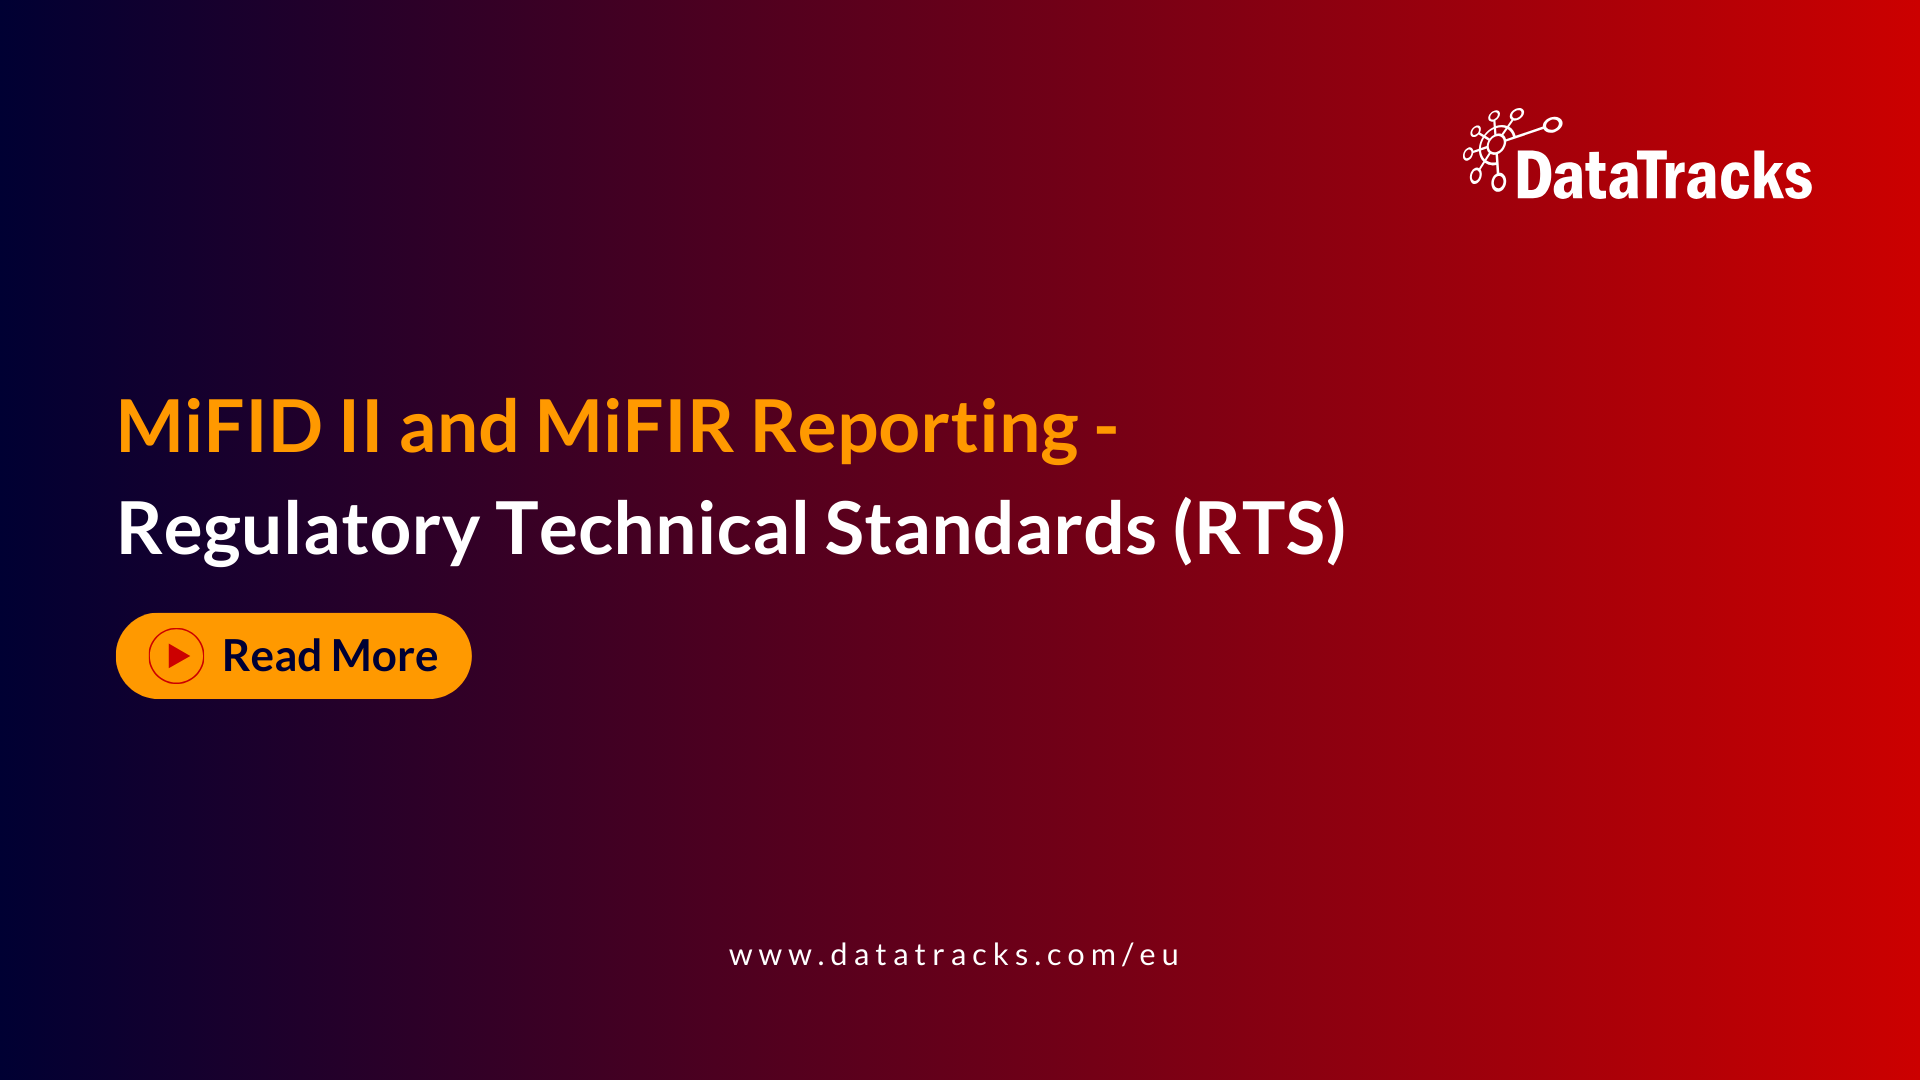 MiFID II Technical Standards: Safeguarding of client financial instruments and funds